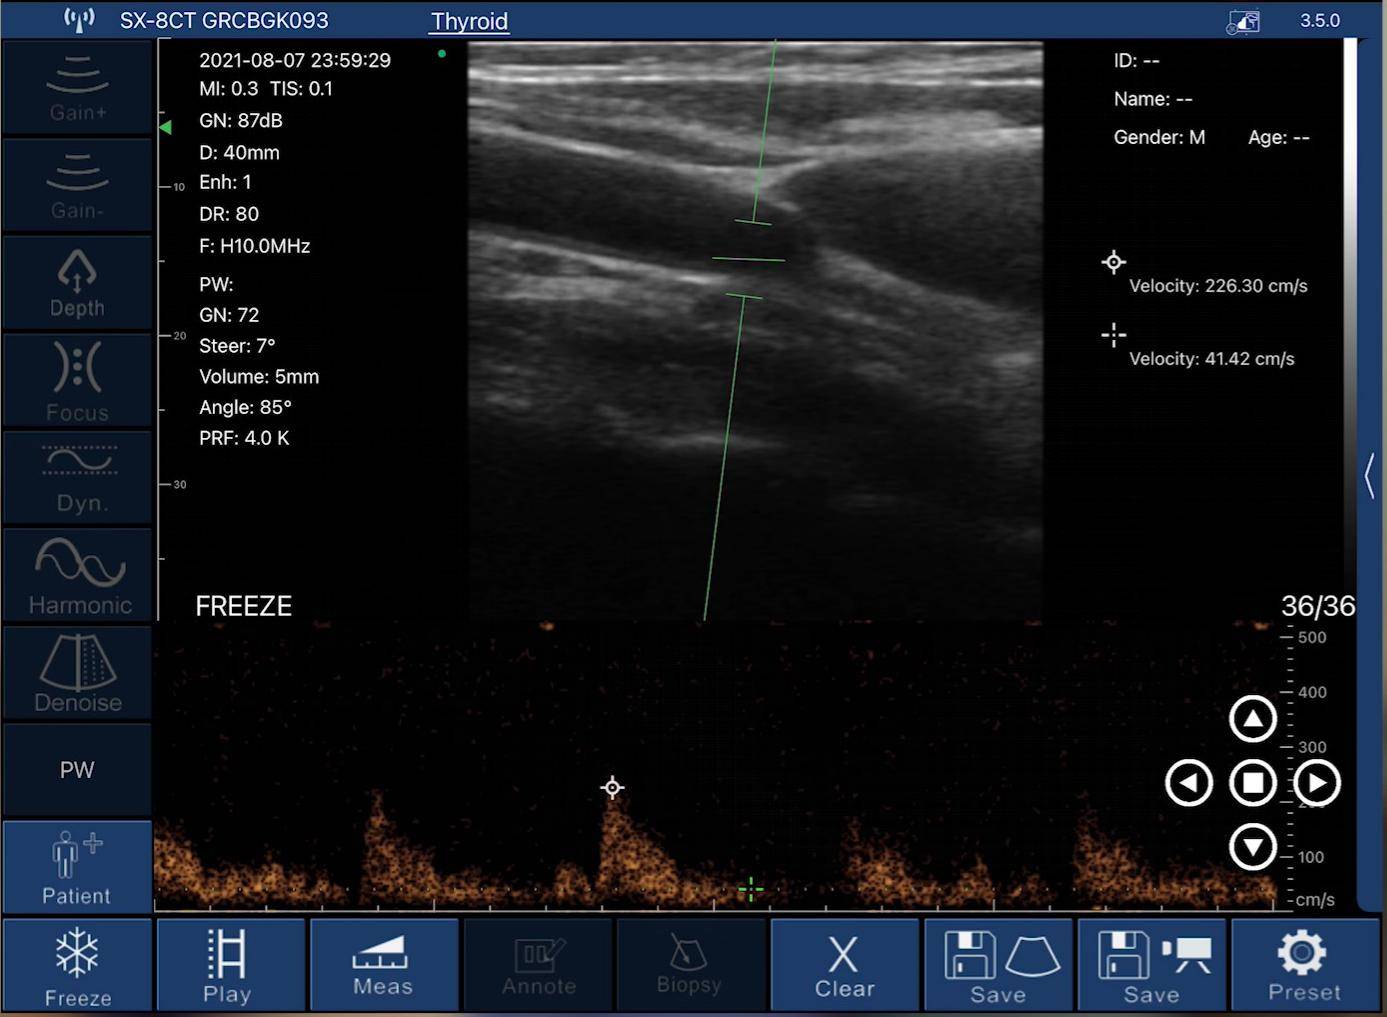 EagleView handheld ultrasound shows measured velocity using pulsed wave doppler.